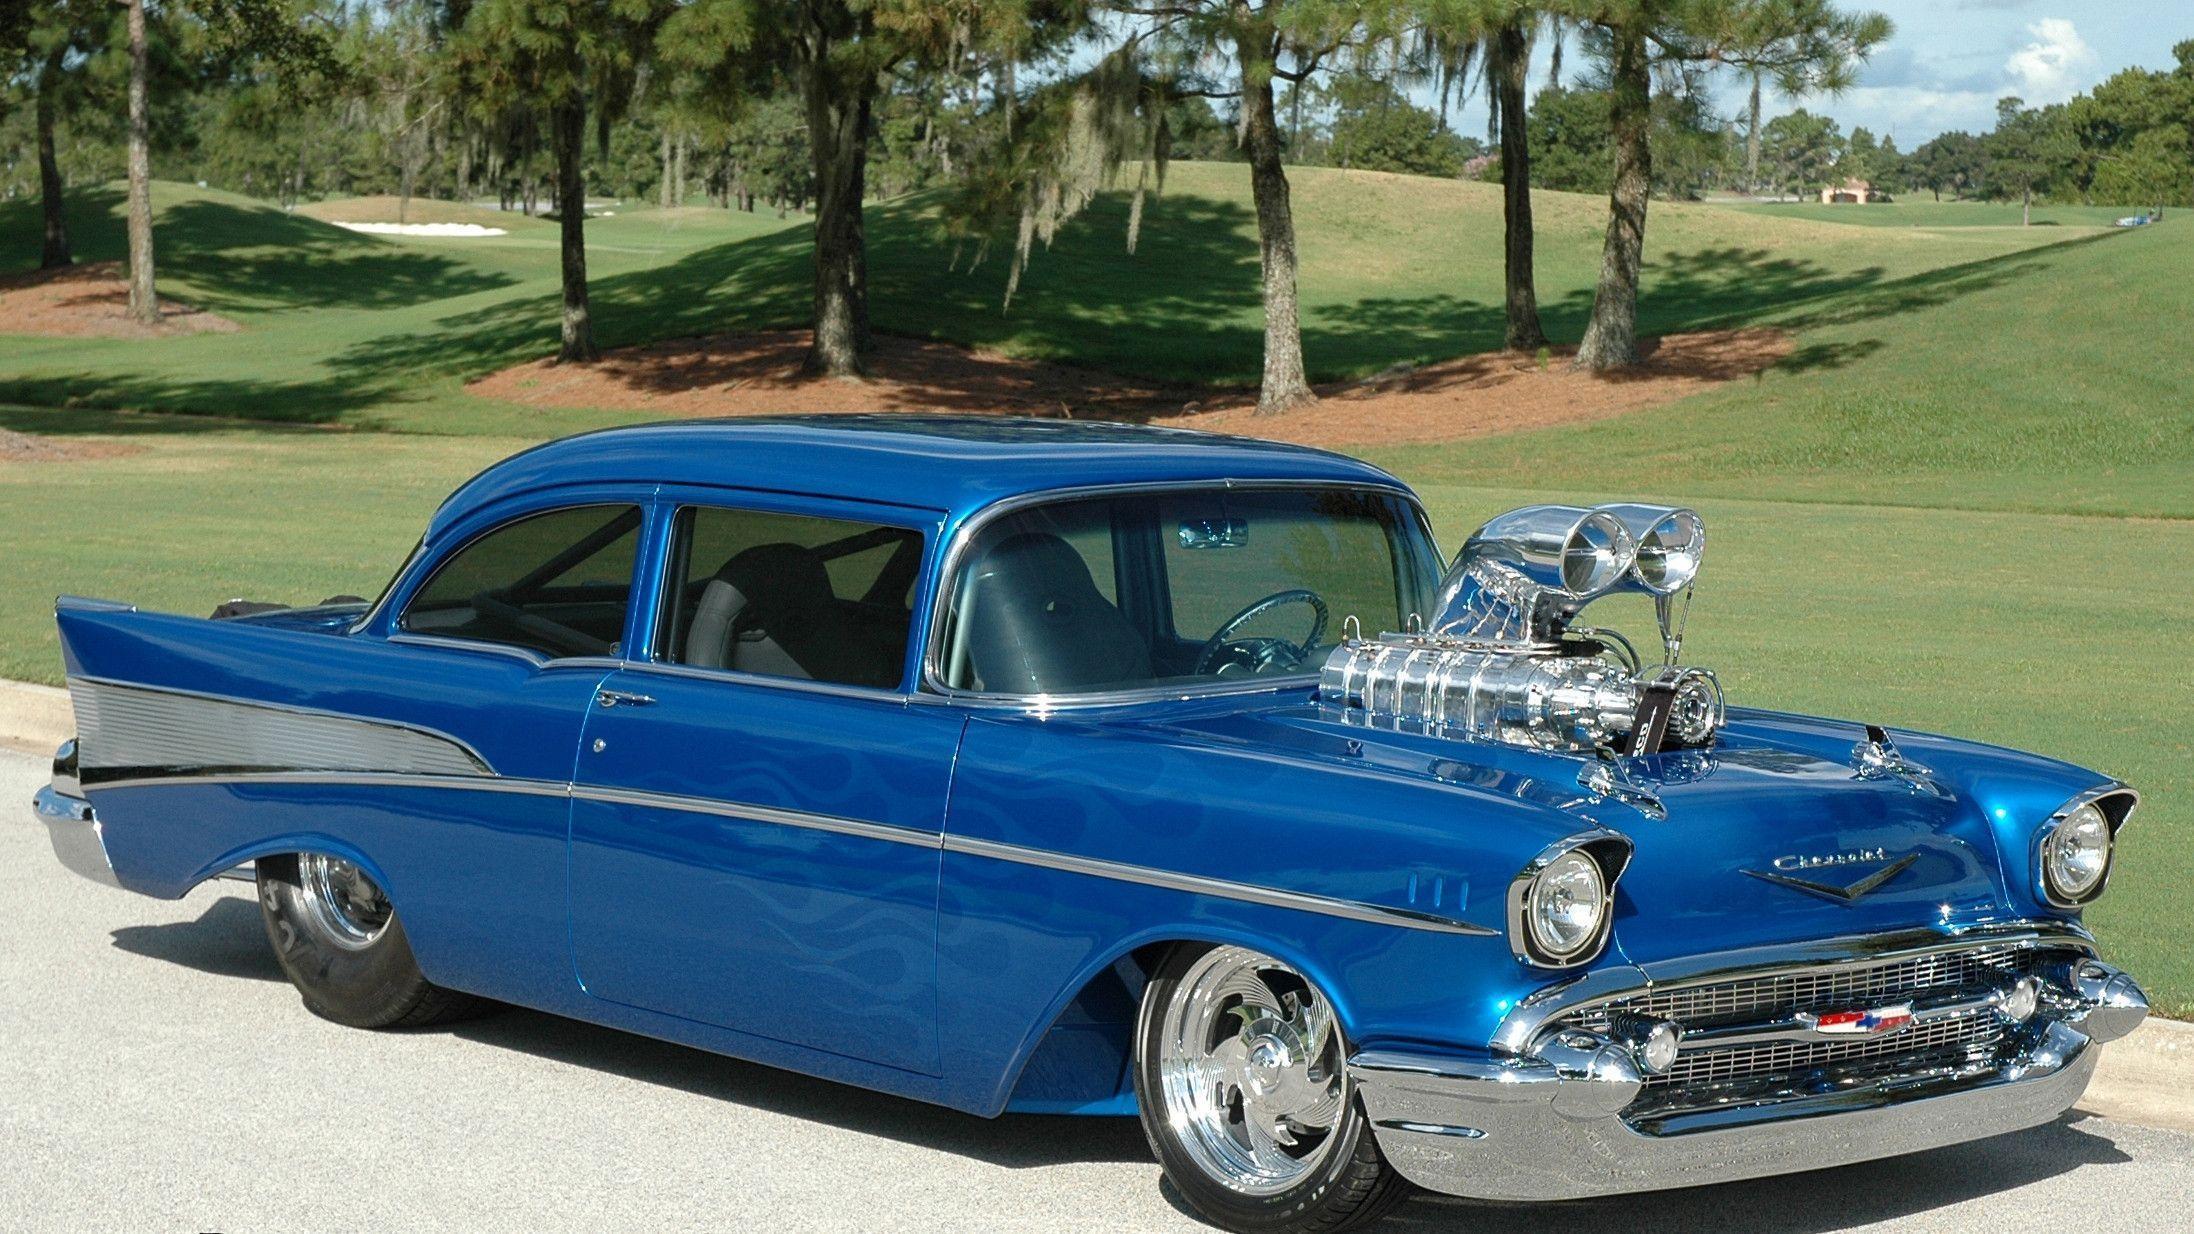 image For > 57 Chevy Wallpaper